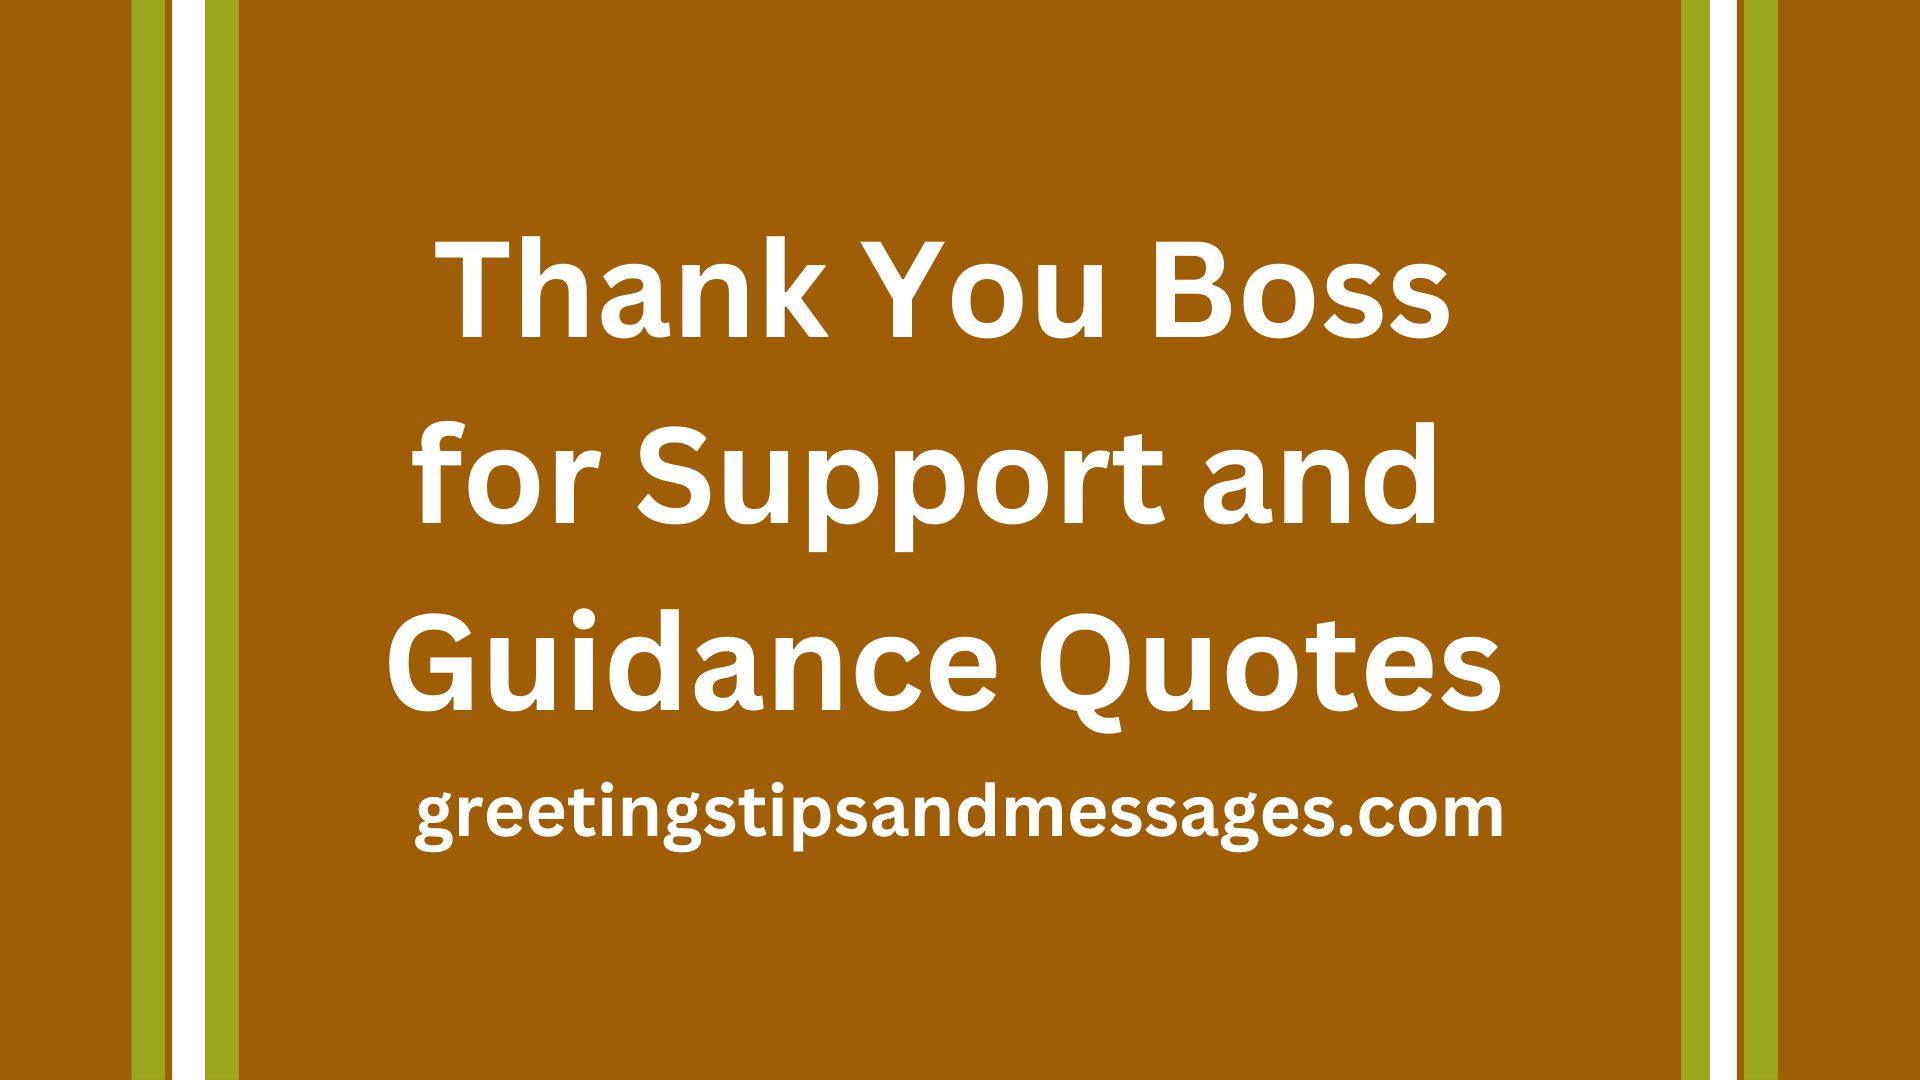 Thank You for Your Support and Guidance Quotes to Boss